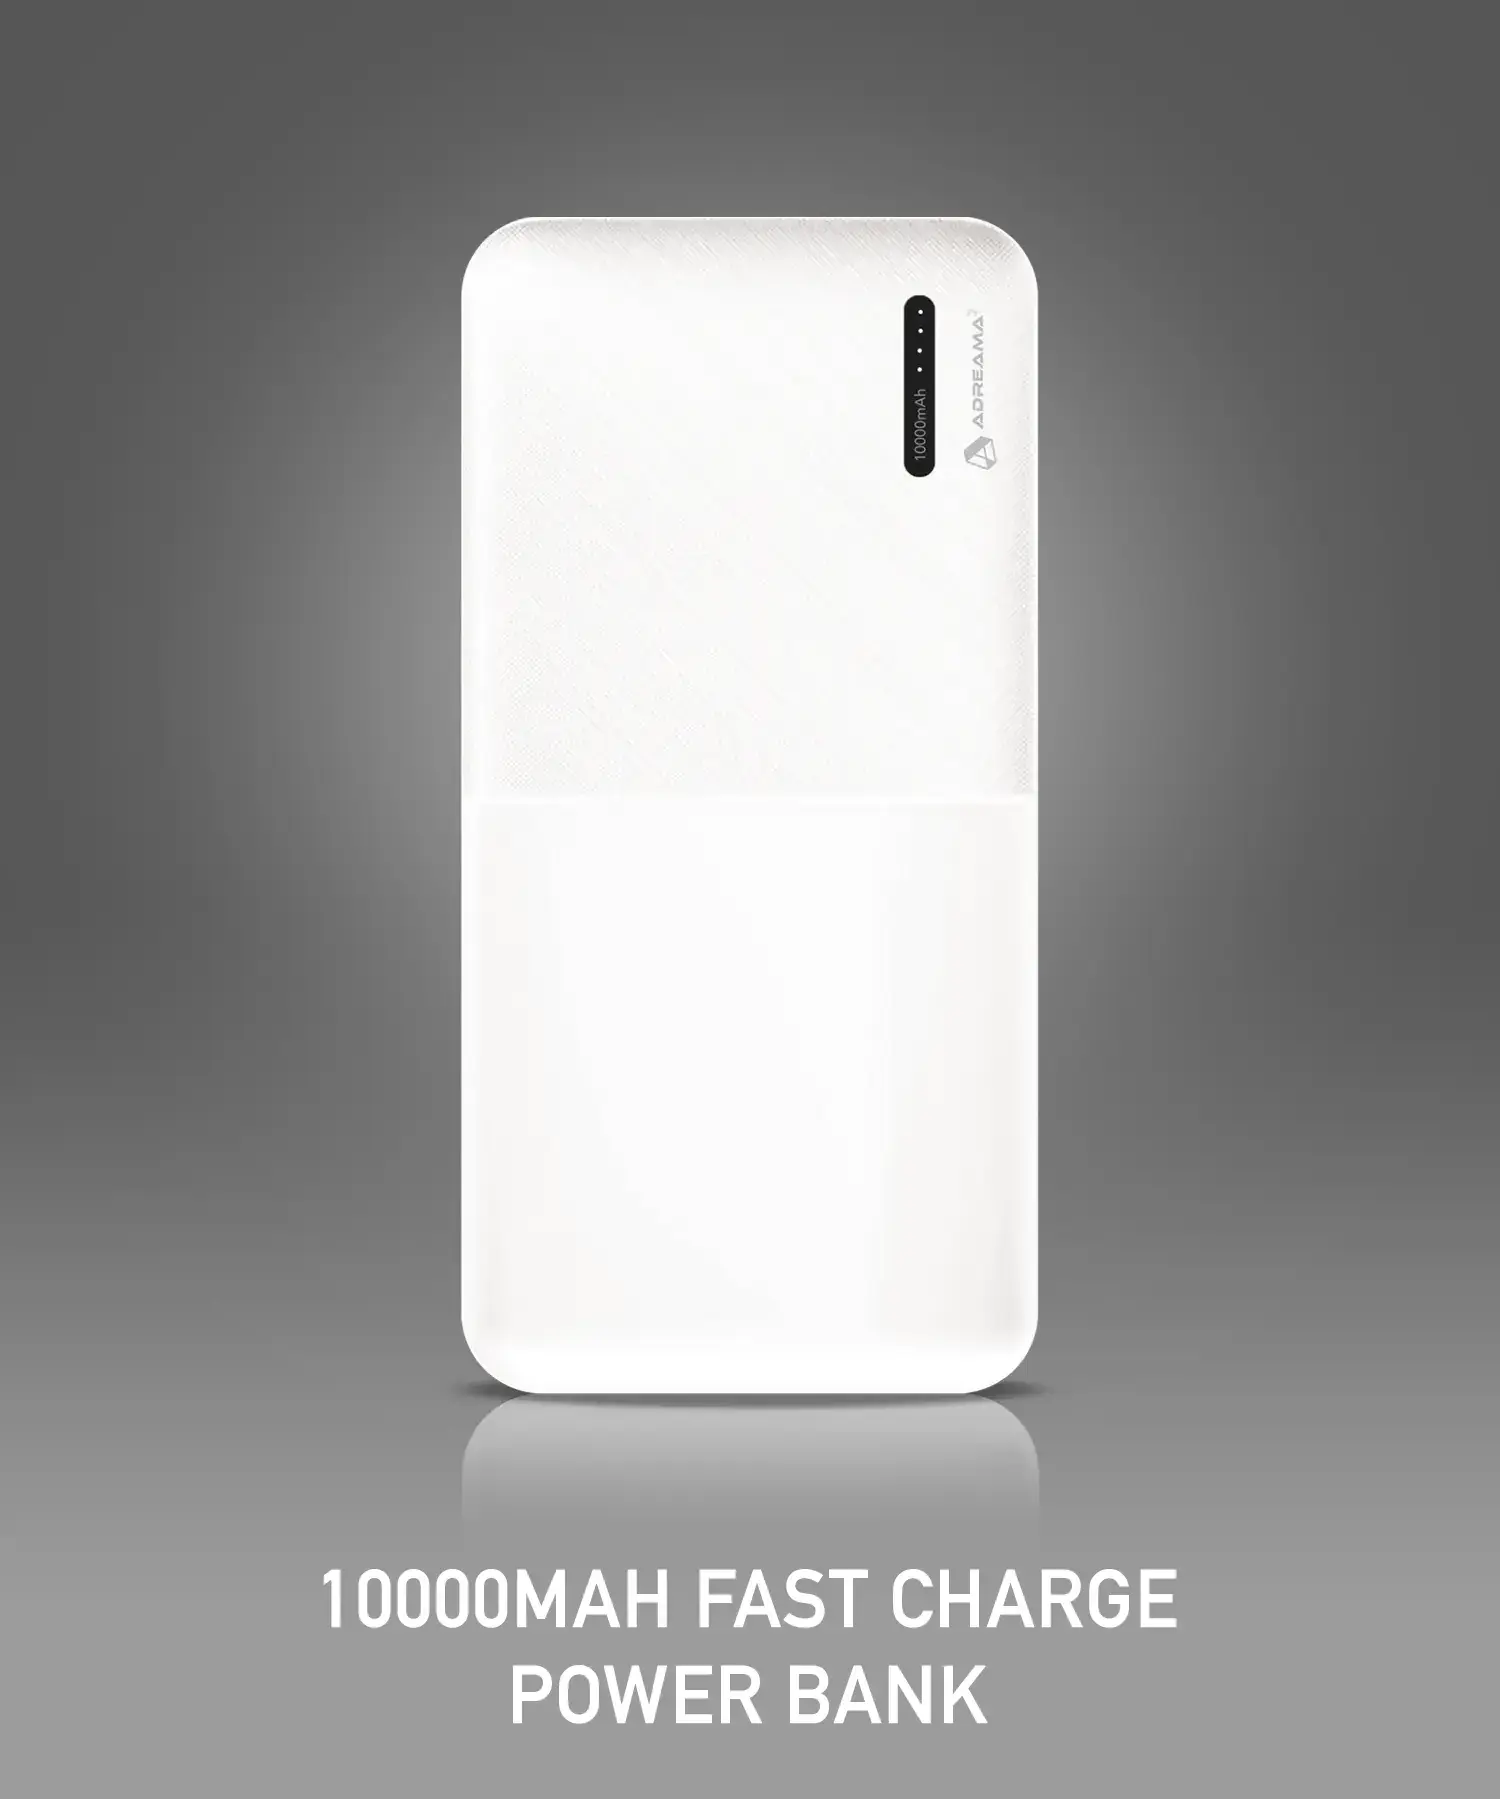 Adreama White 10000mAh Power Bank: 5 Key Reasons to Get Yours